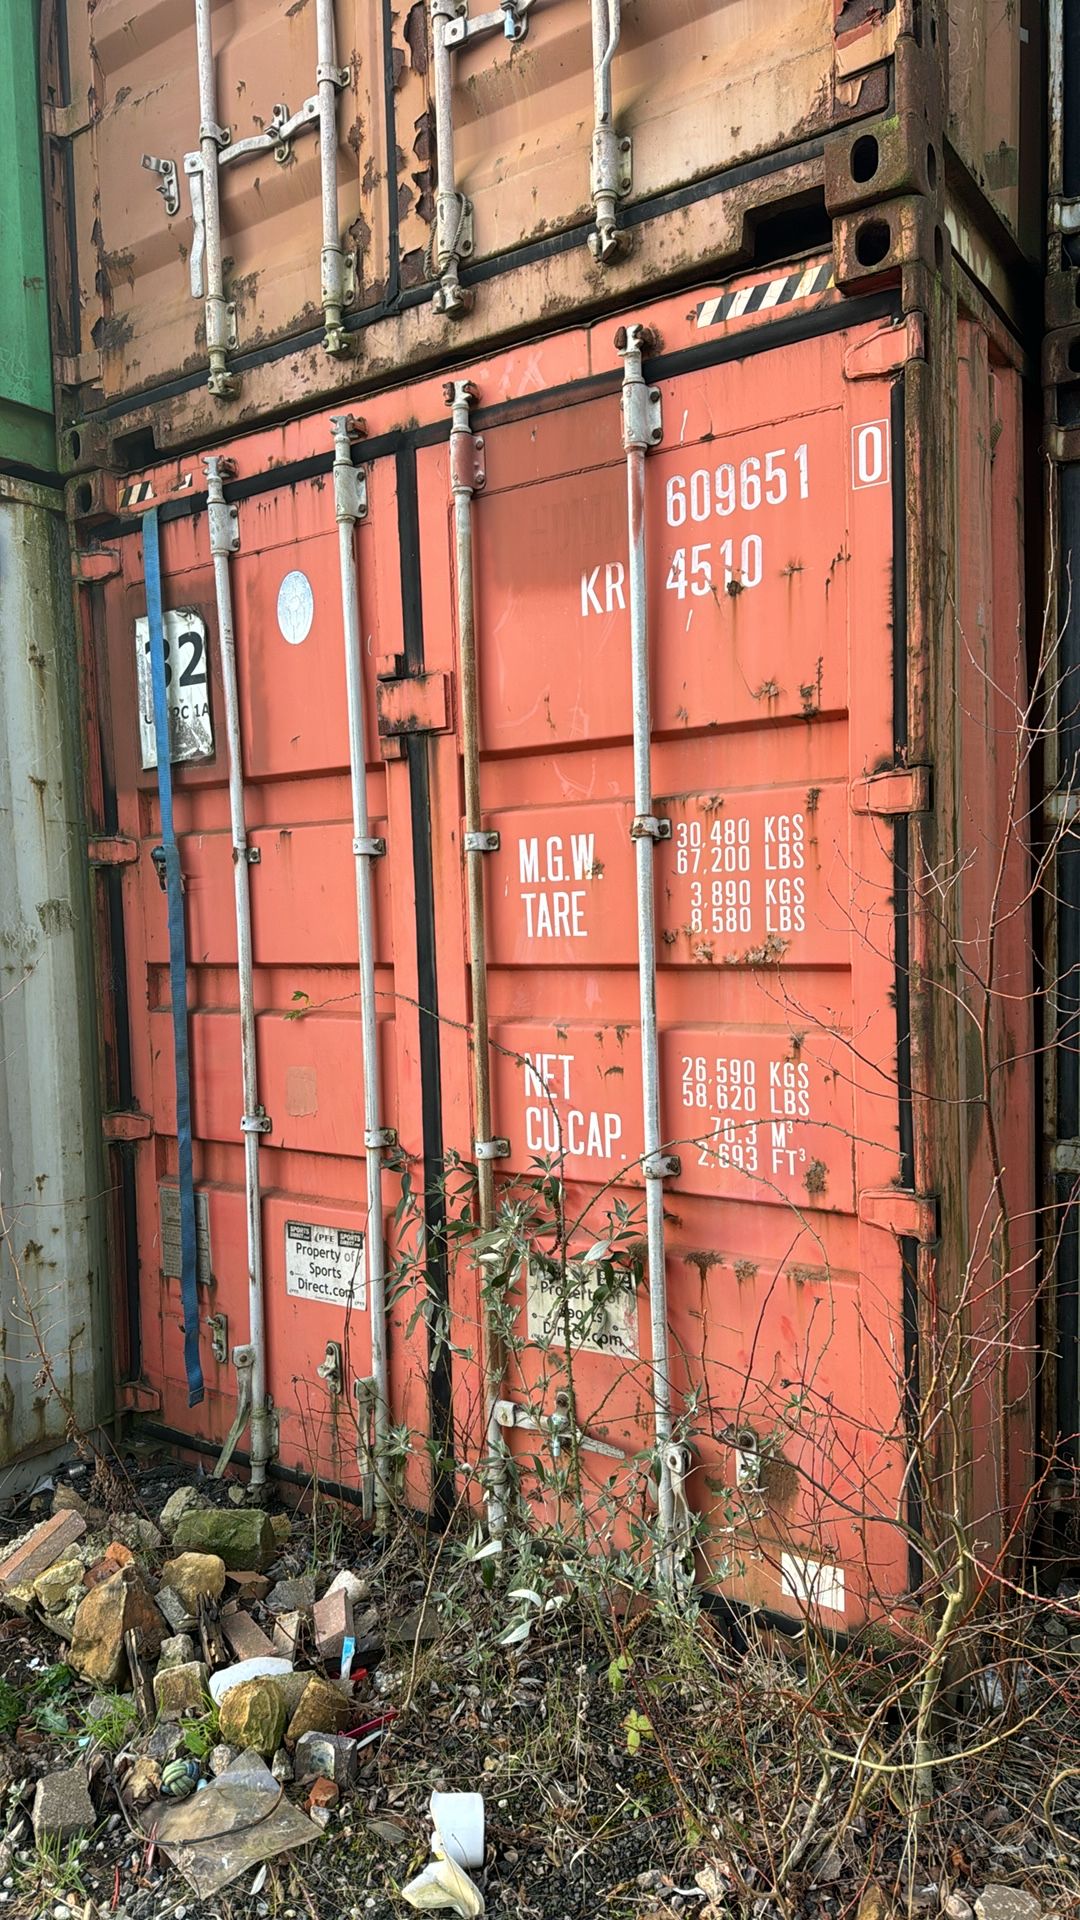 Shipping container, 56 (609,6,510, KR, 4510) - Image 2 of 2